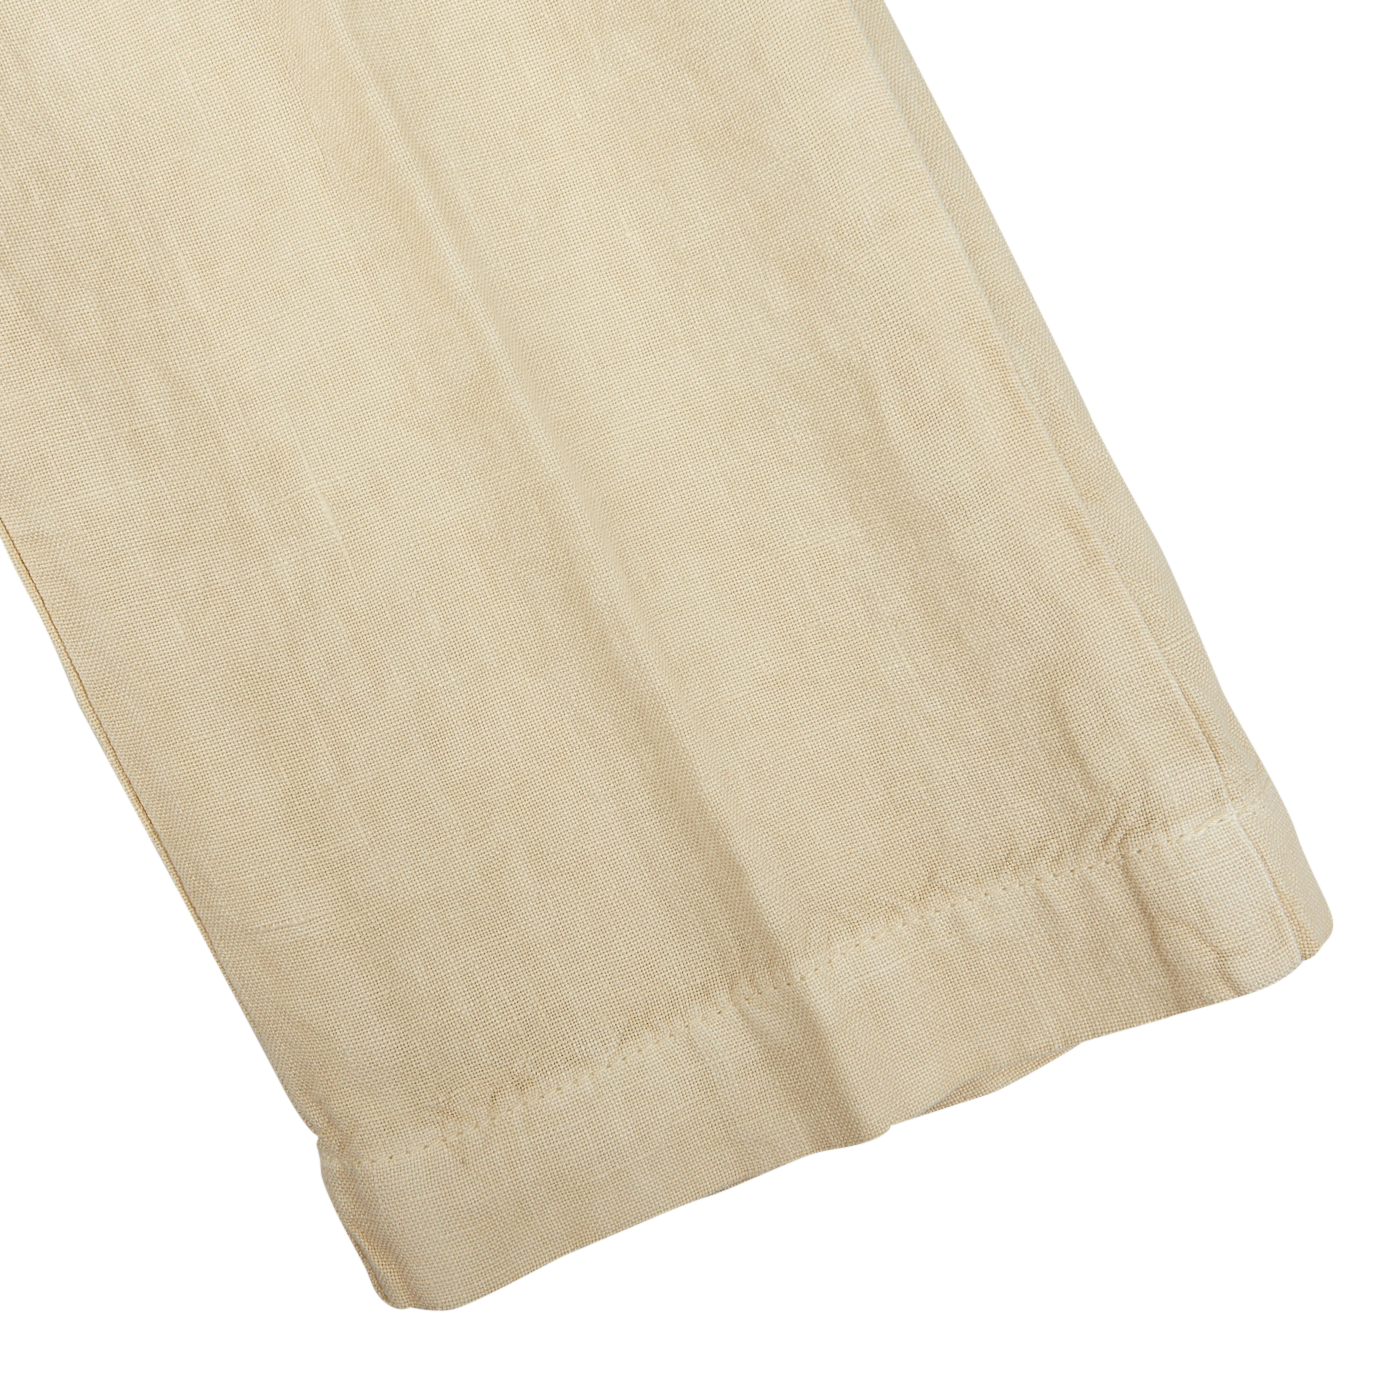 Light Beige Linen Casual Trousers by Massimo Alba, made from pure linen canvas, with a simple hem on a plain cream fabric against a white background. Ideal for casual wear.